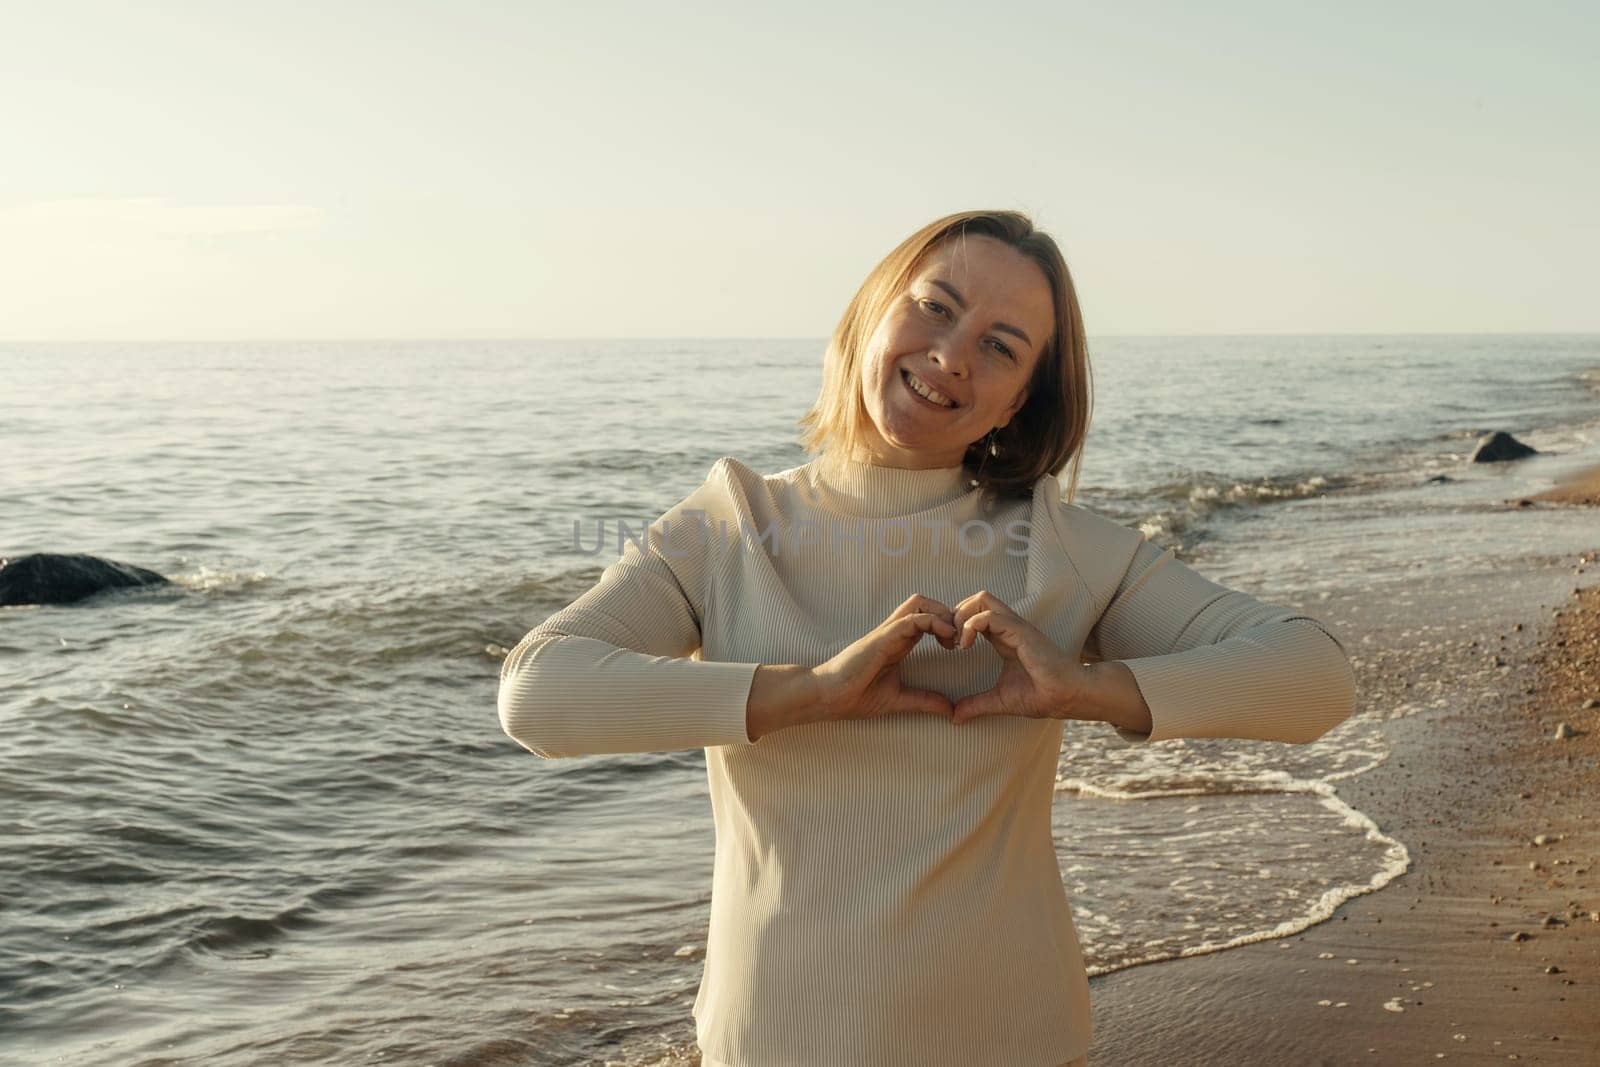 A woman is standing on a beach, forming a heart shape with her hands.